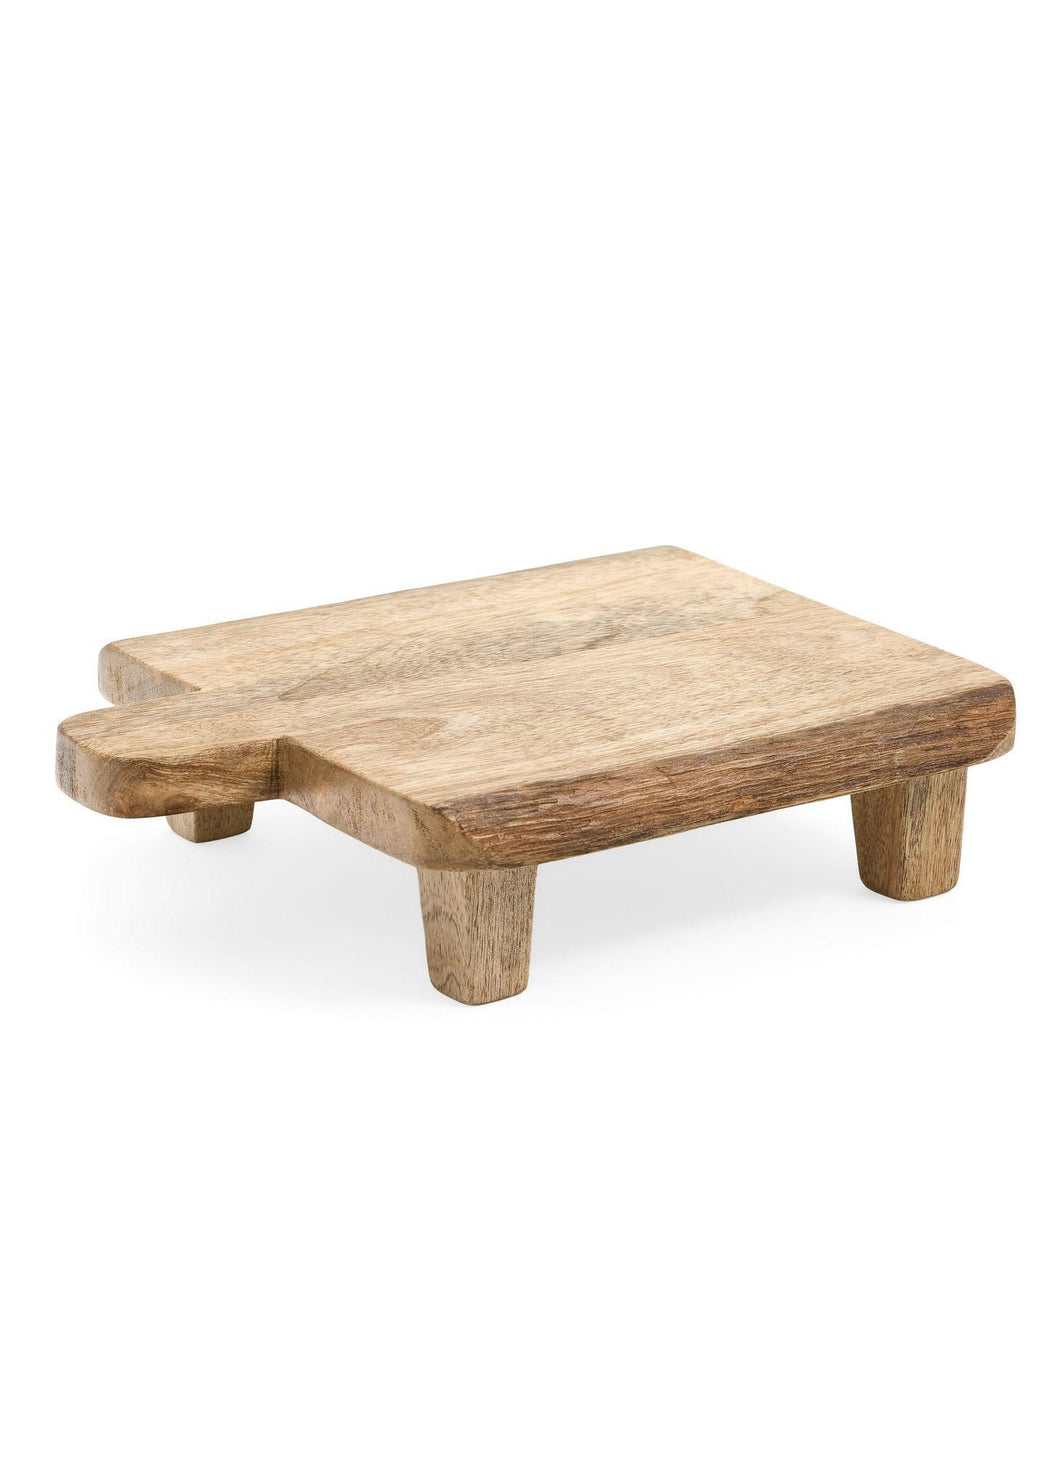 Serving Board with Legs